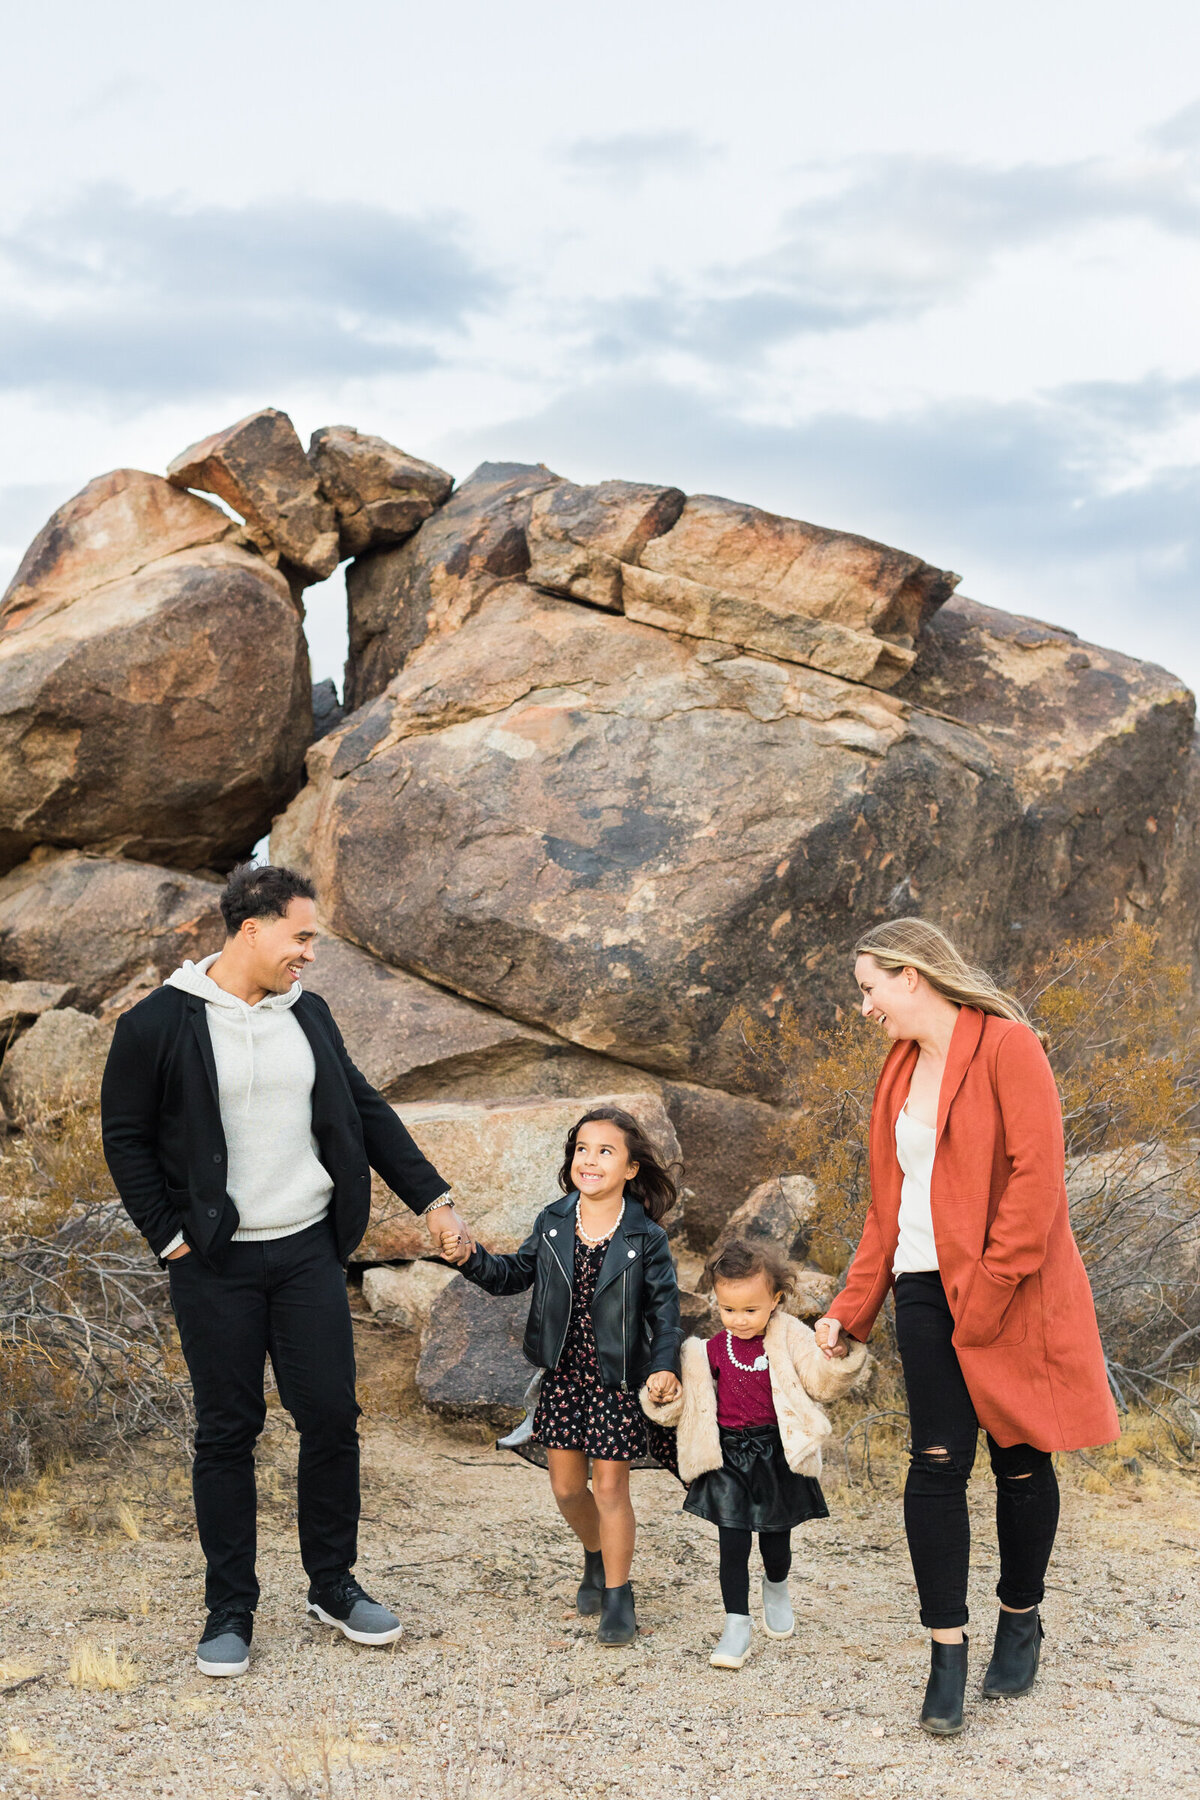 family smiling together in Phoenix desert